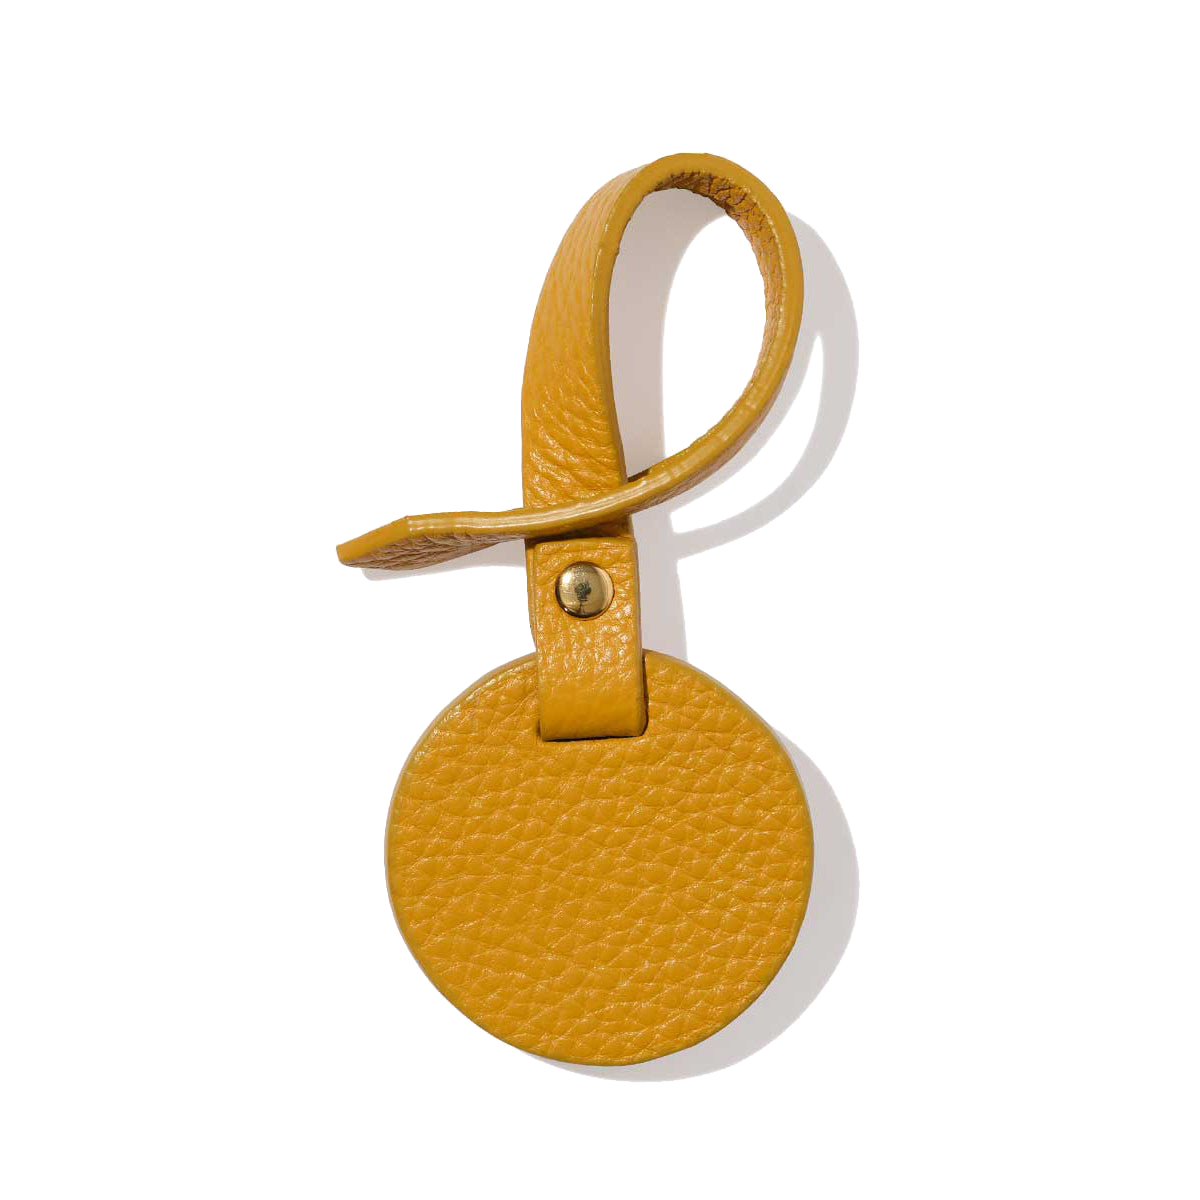 NAB_Leather_Luggage_Tag_Yellow_W_Left-Not-Another-Bill_135b69f3-7fce-4045-a5d7-2adb5f2beb32.png